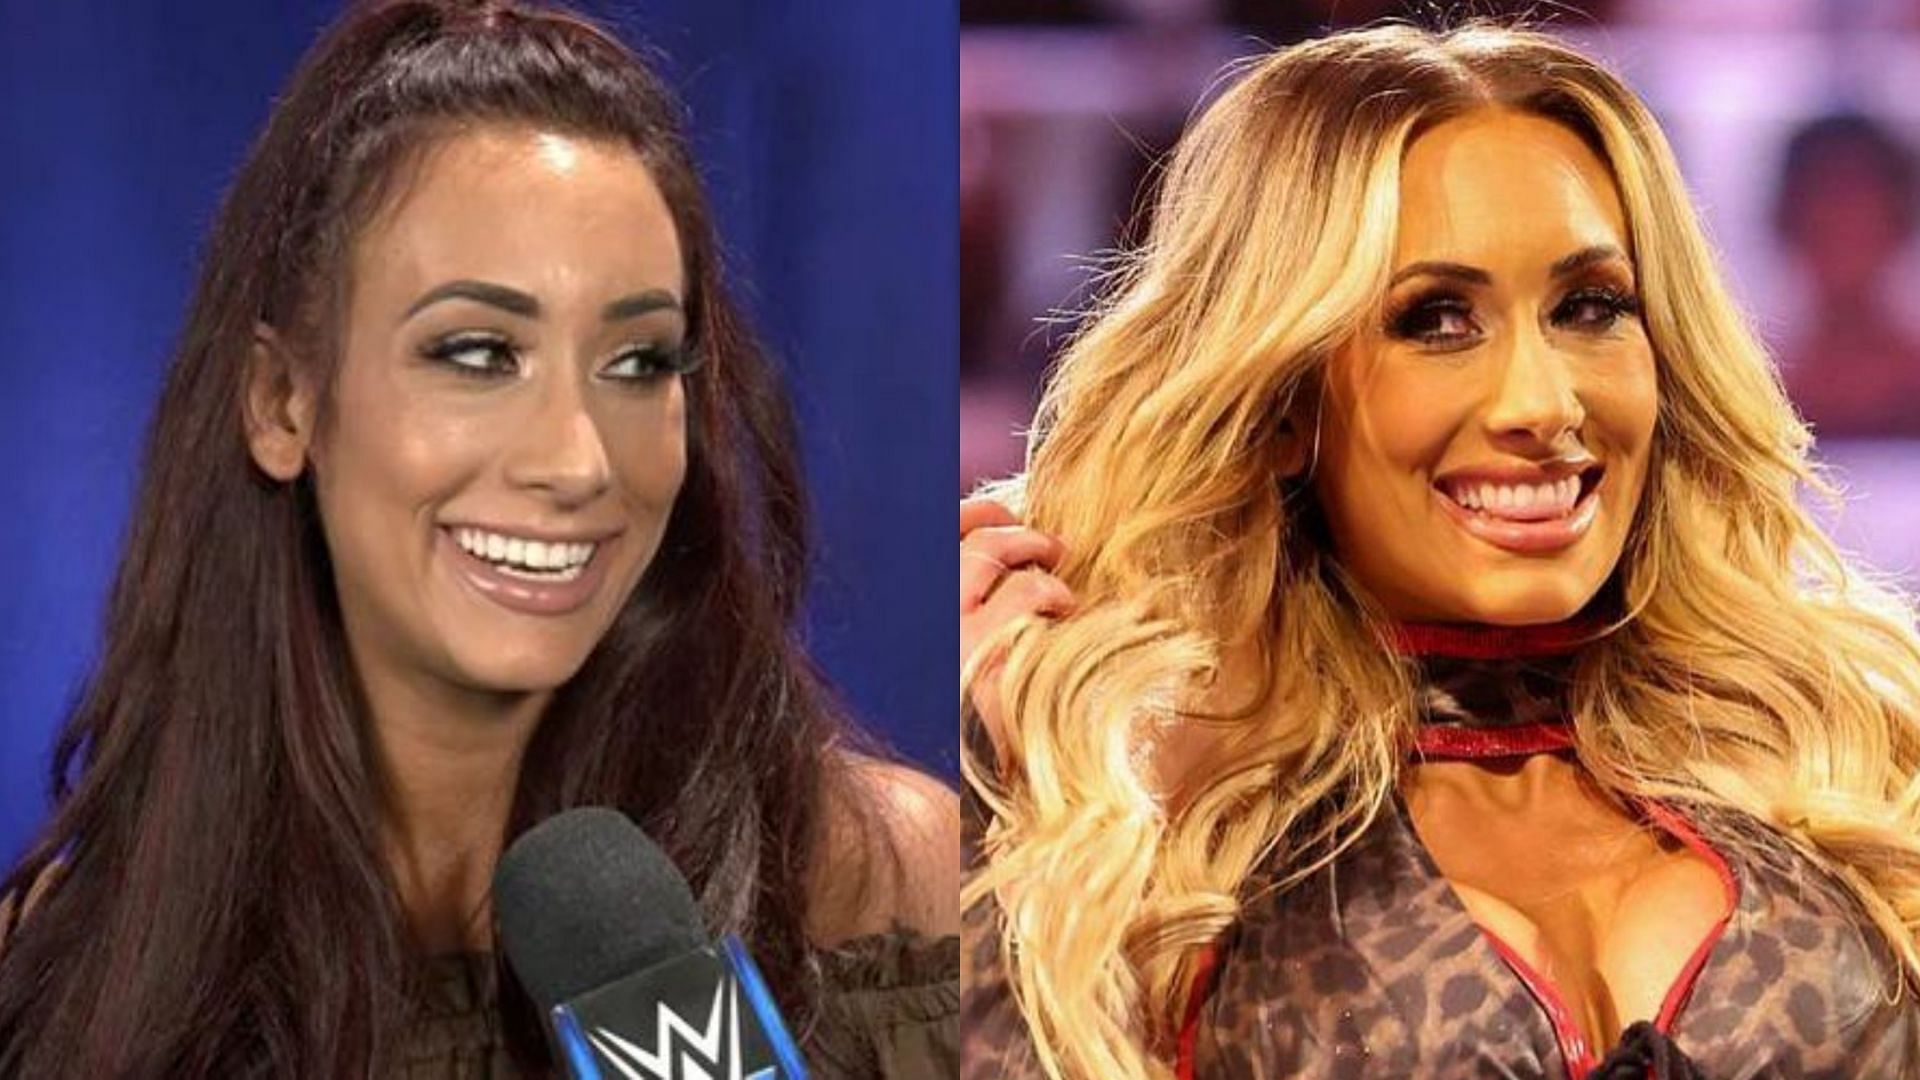 Carmella has changed her hair color a few times over the past few years